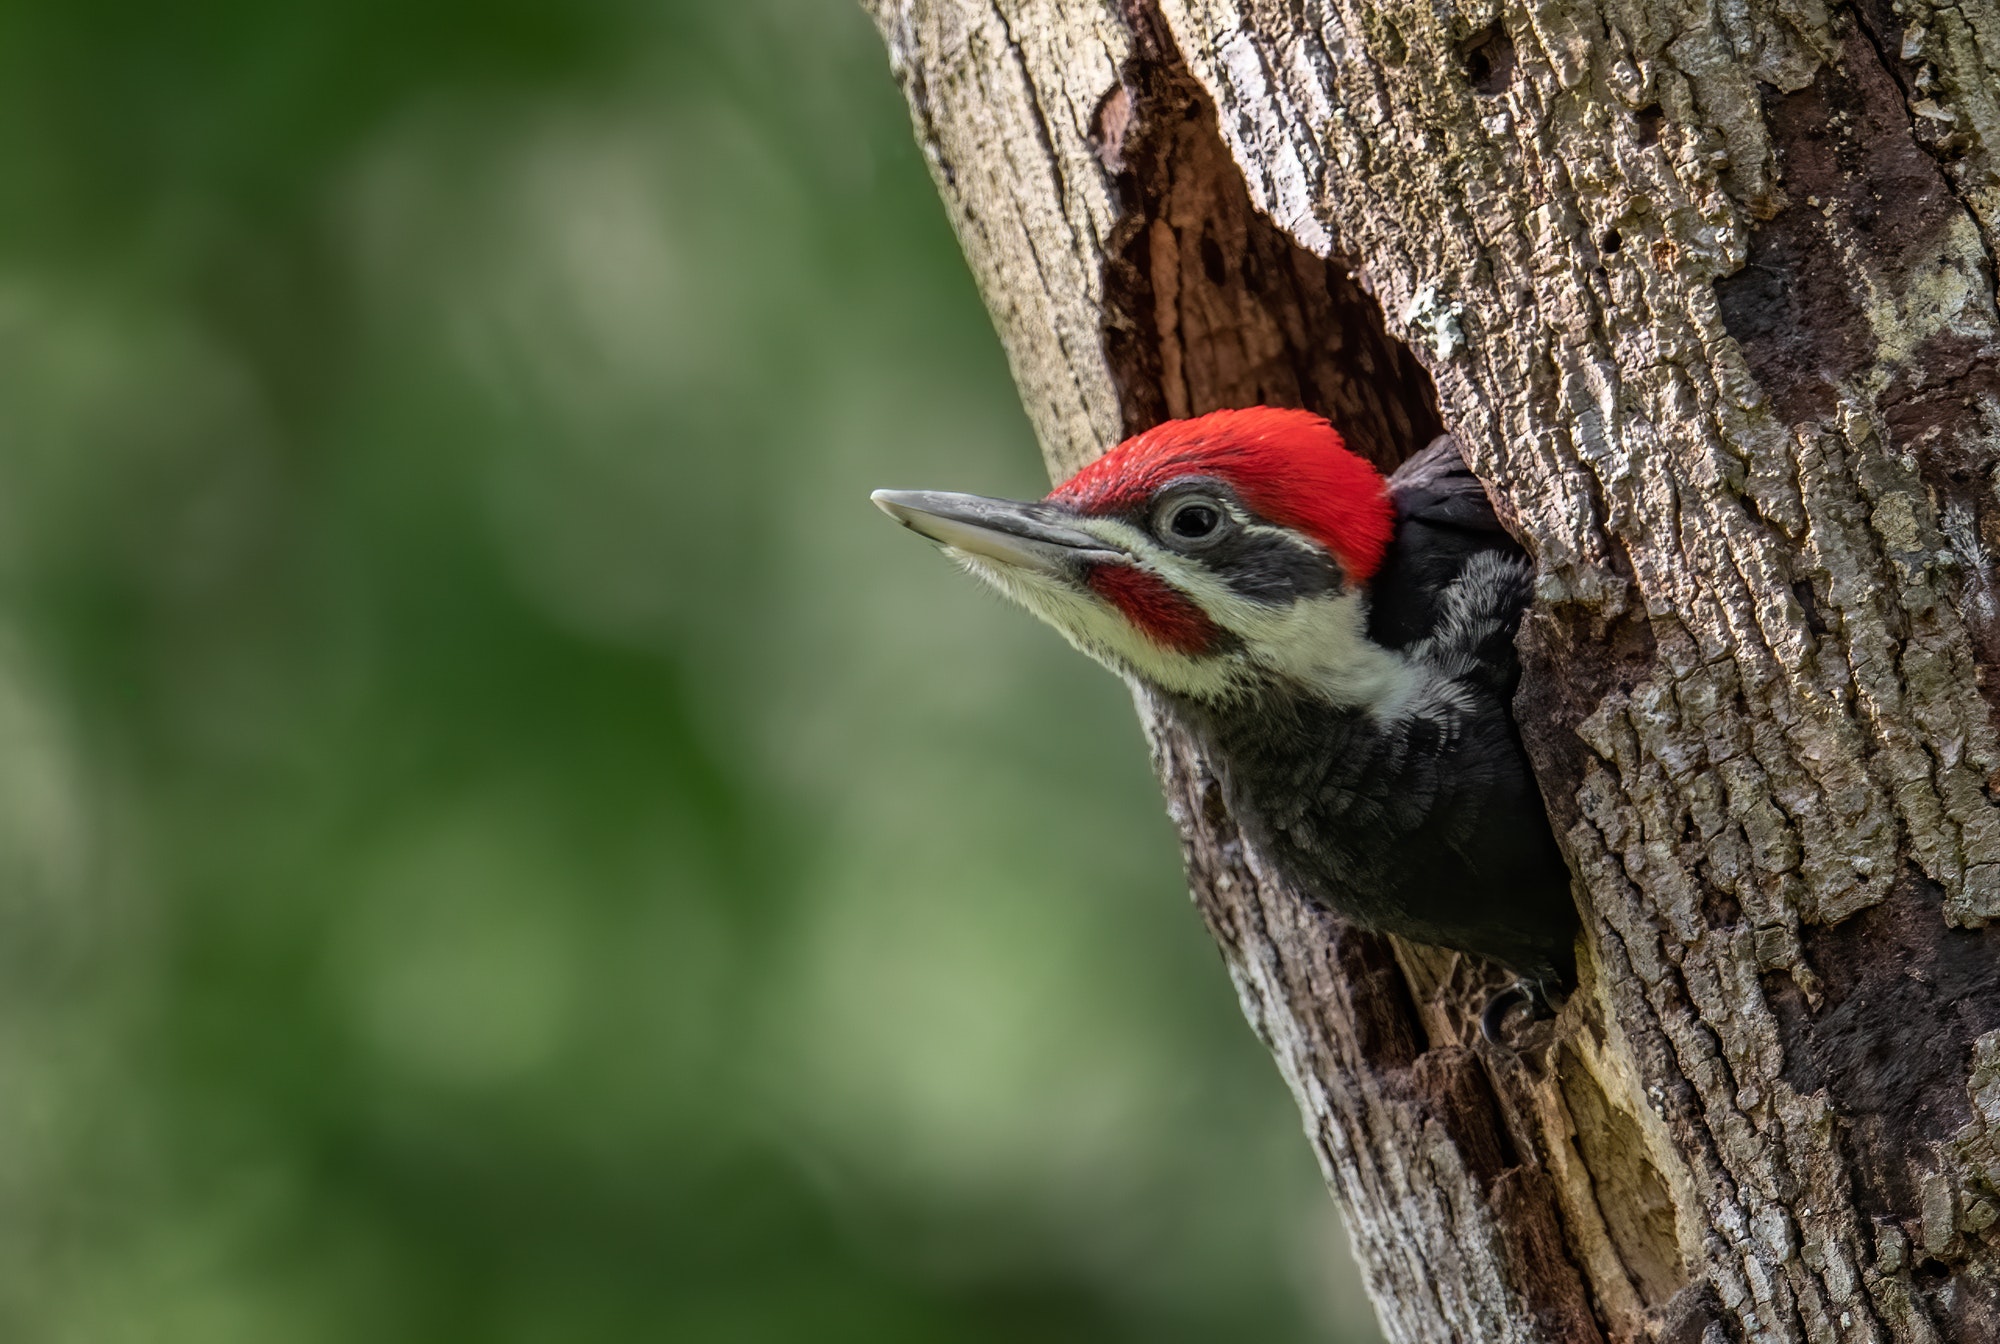 How to get rid of woodpeckers — Jonathan’s student essay